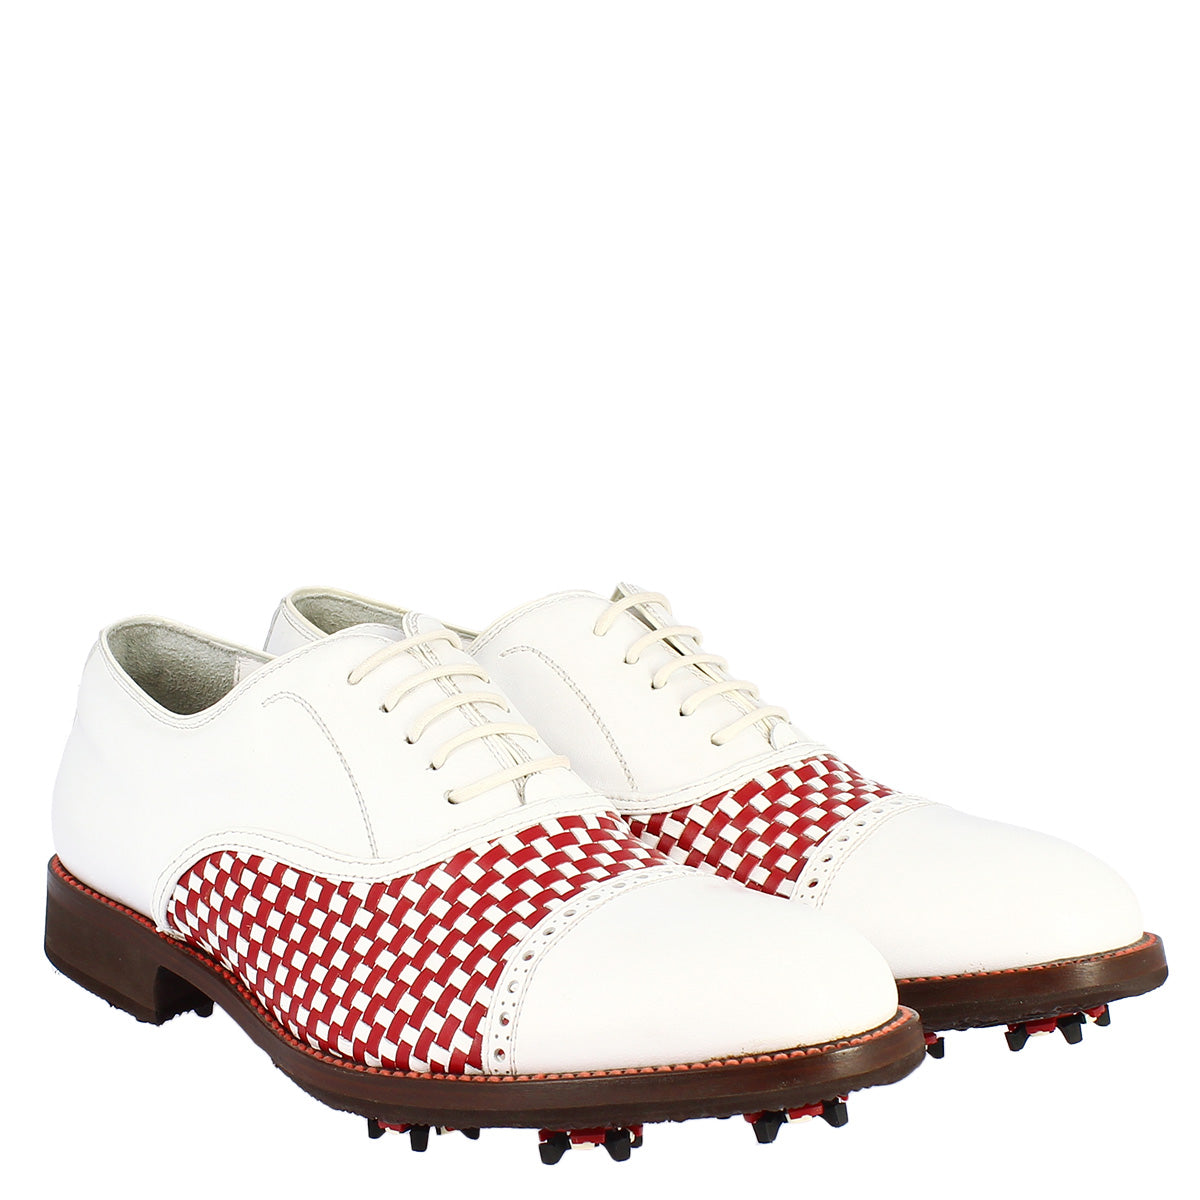 Classic handmade men's golf shoes in white red calf leather